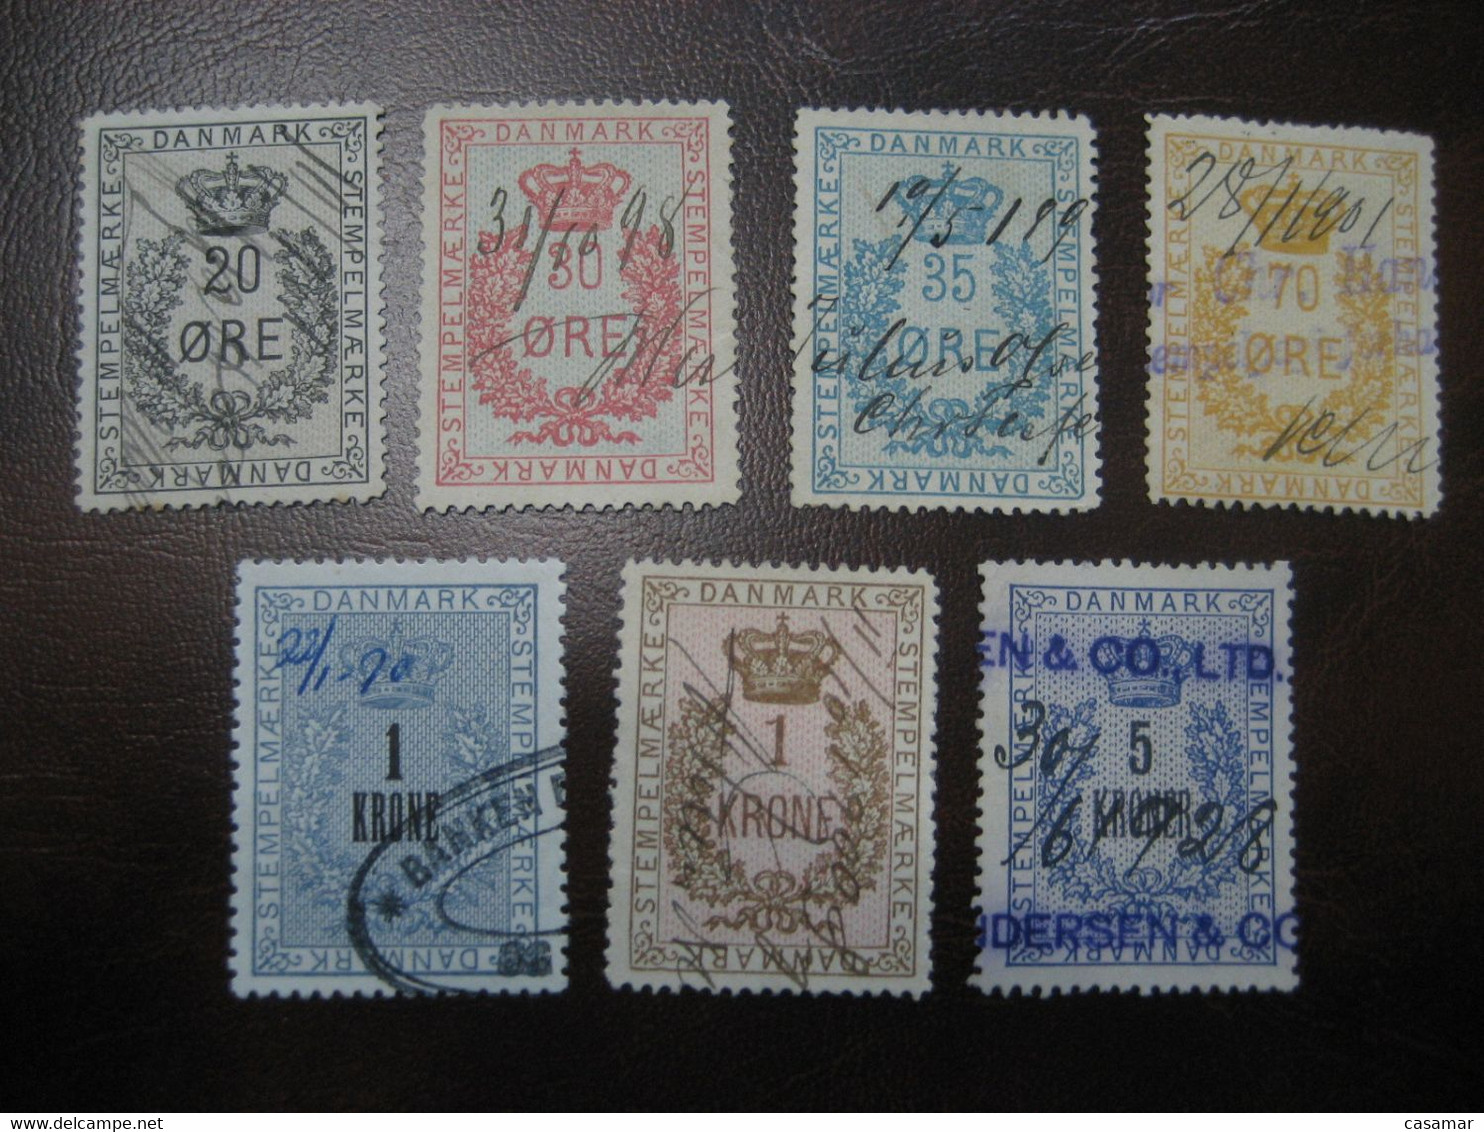 Lot 7 STEMPEL MARKE 20 Ore To 5 Kr All Diff. Revenue Fiscal Tax Postage Due Official Denmark - Revenue Stamps